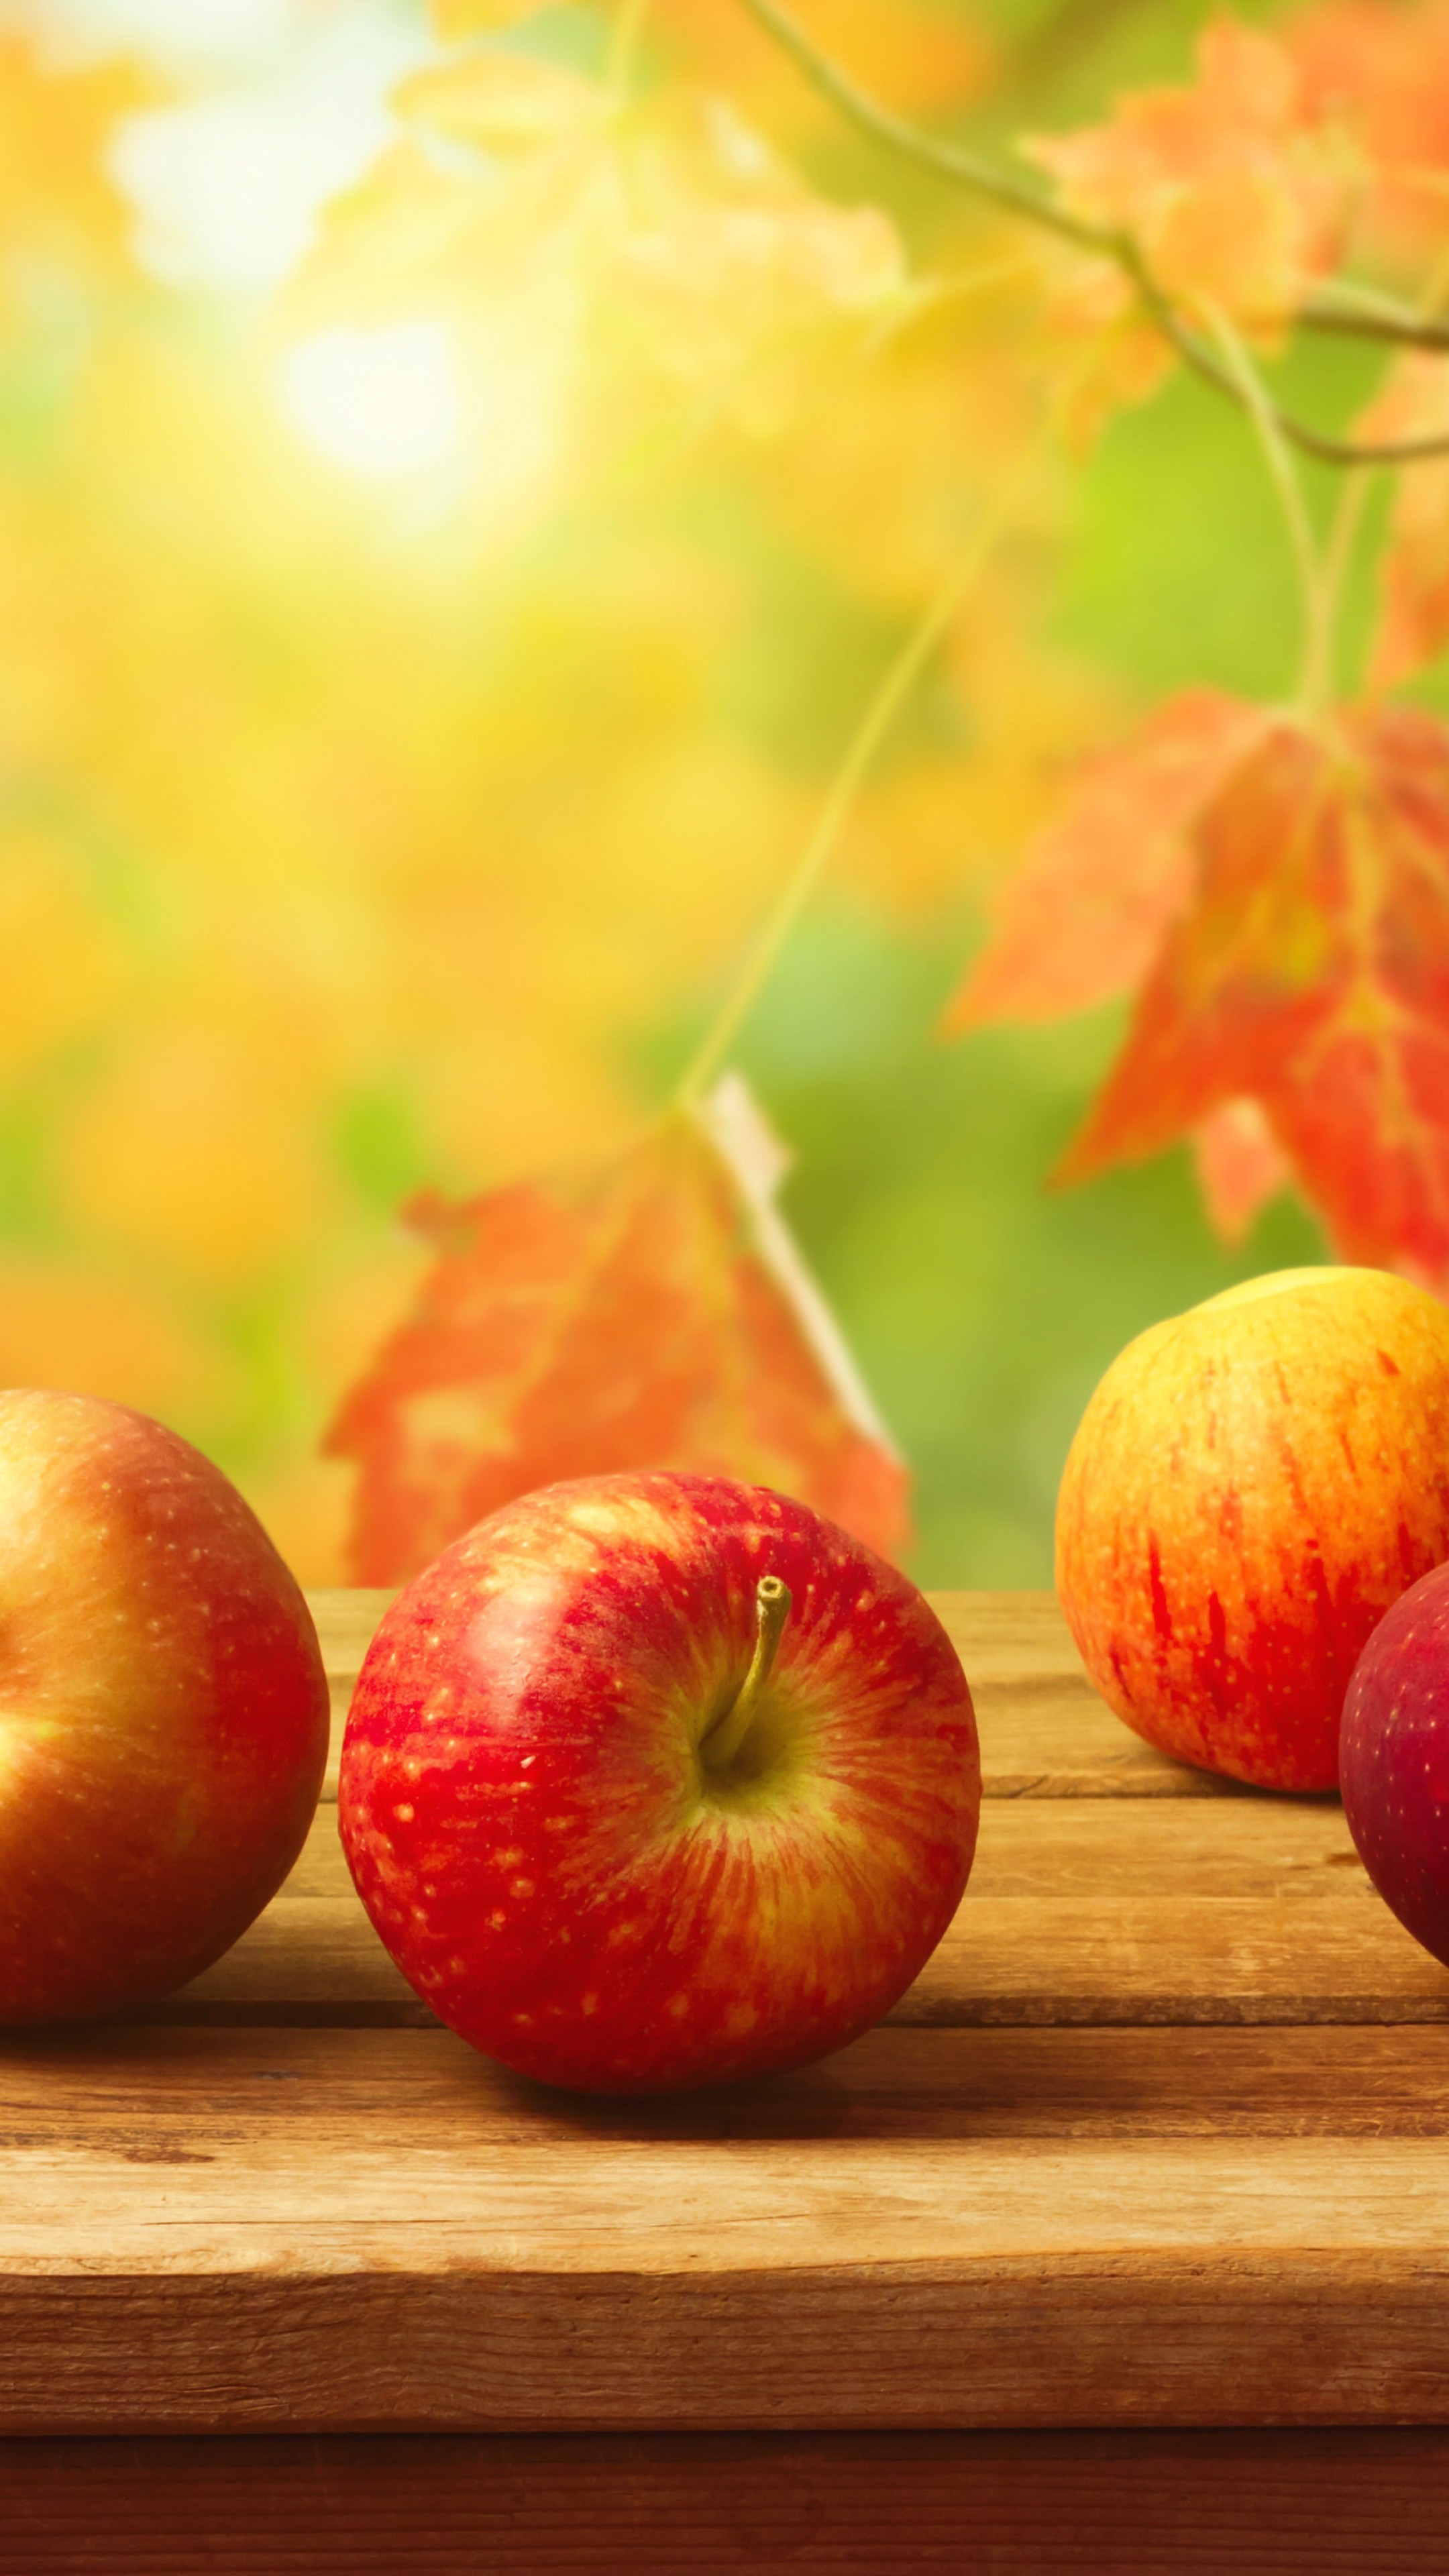 Fall Apple Iphone Backgrounds - HD Wallpaper 